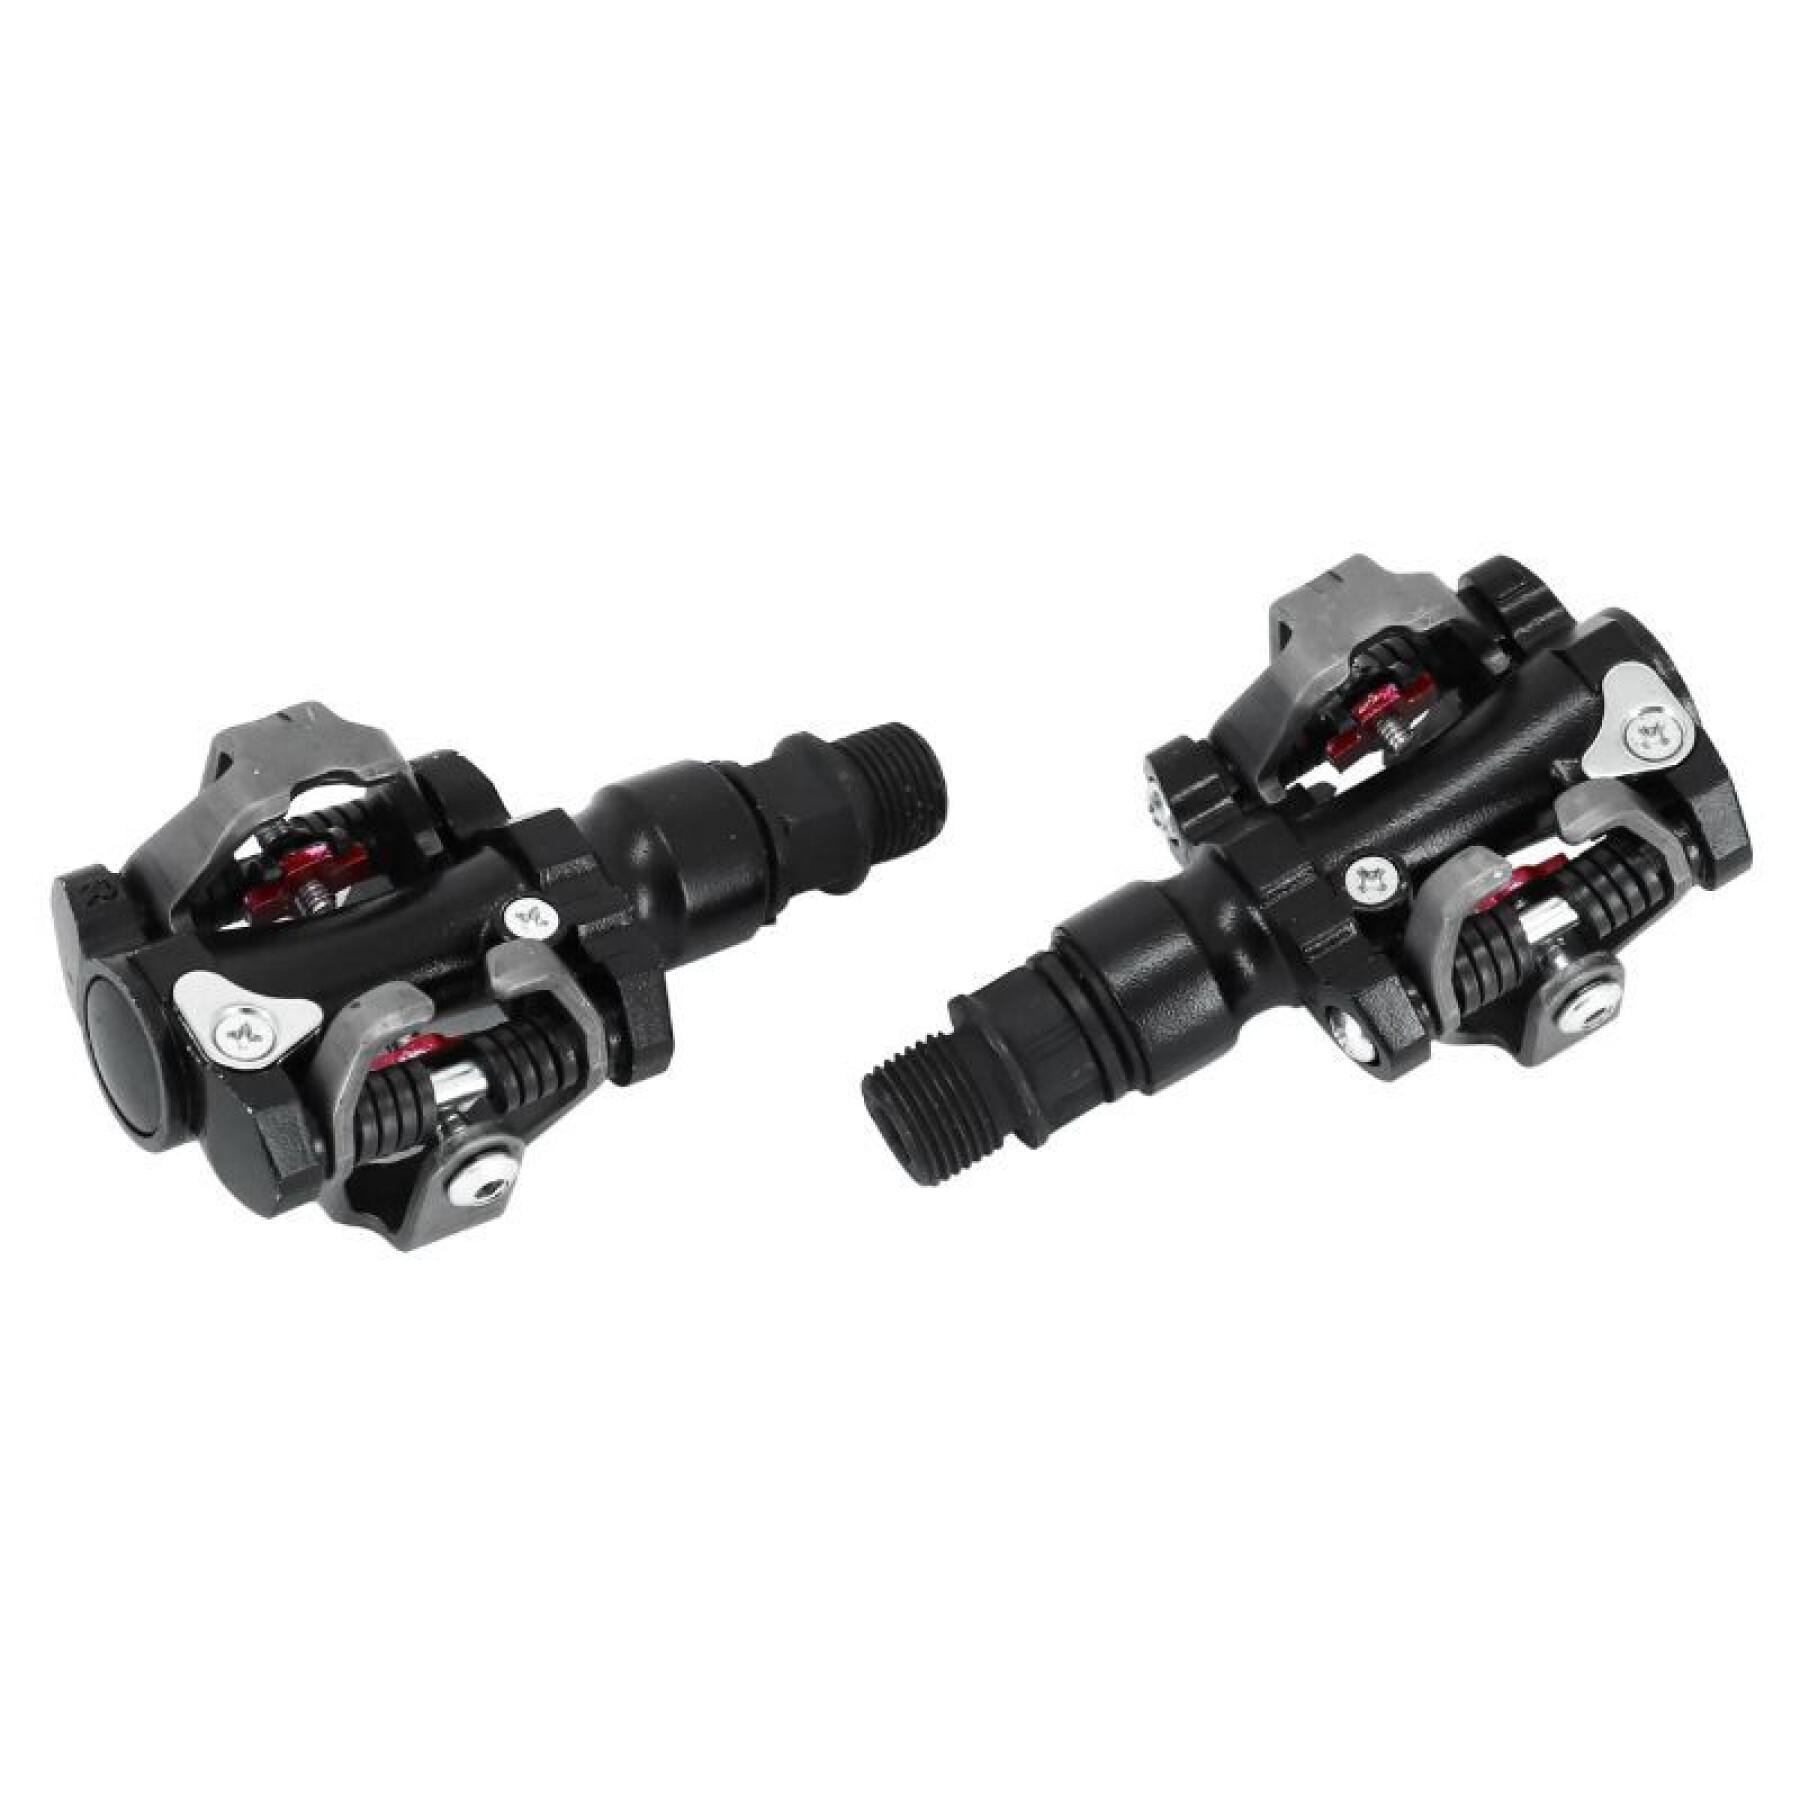 Automatic spd type ball bearing pedals with aluminum cleats Newton